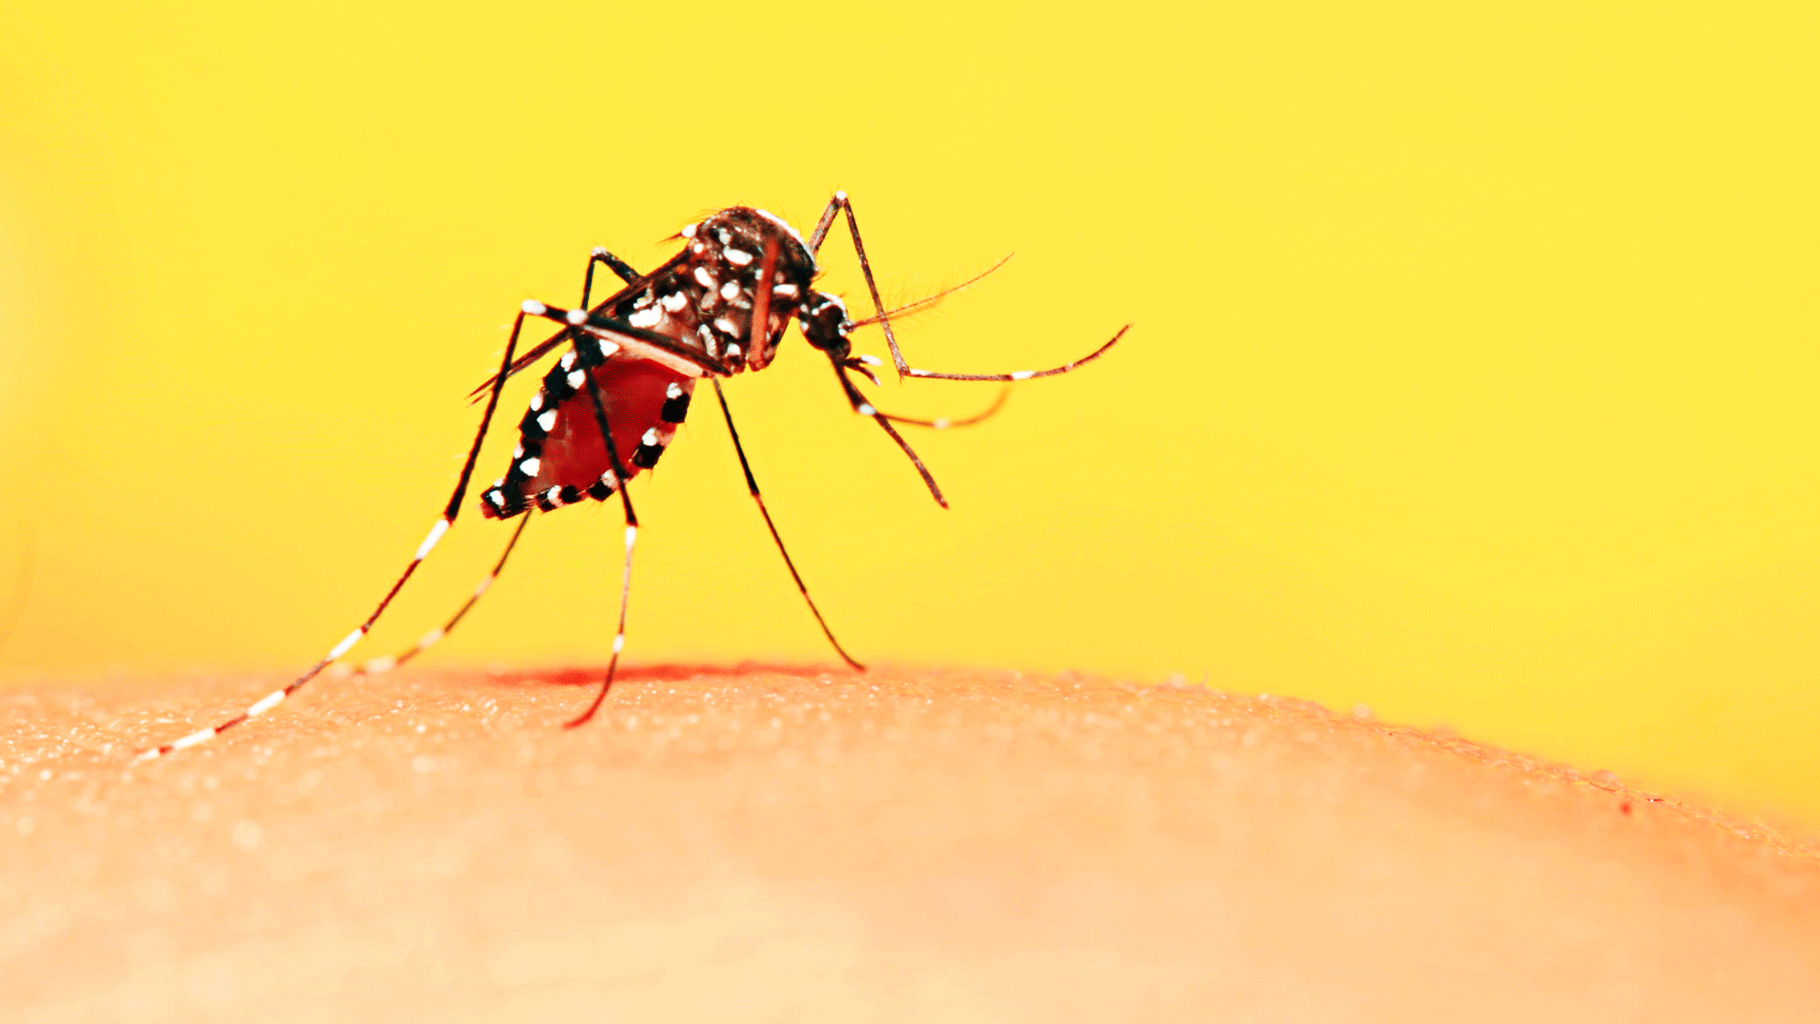 <div class="paragraphs"><p>Some people are are "<a href="https://www.thequint.com/topic/mosquito">mosquito</a> magnets," in that consistently more attractive for <a href="https://www.thequint.com/fit/dengue-india-spike-delhi-mumbai-haryana-kolkata-prevention">mosquitoes</a> than others due to skin odor differences, a new study was confirmed.</p></div>